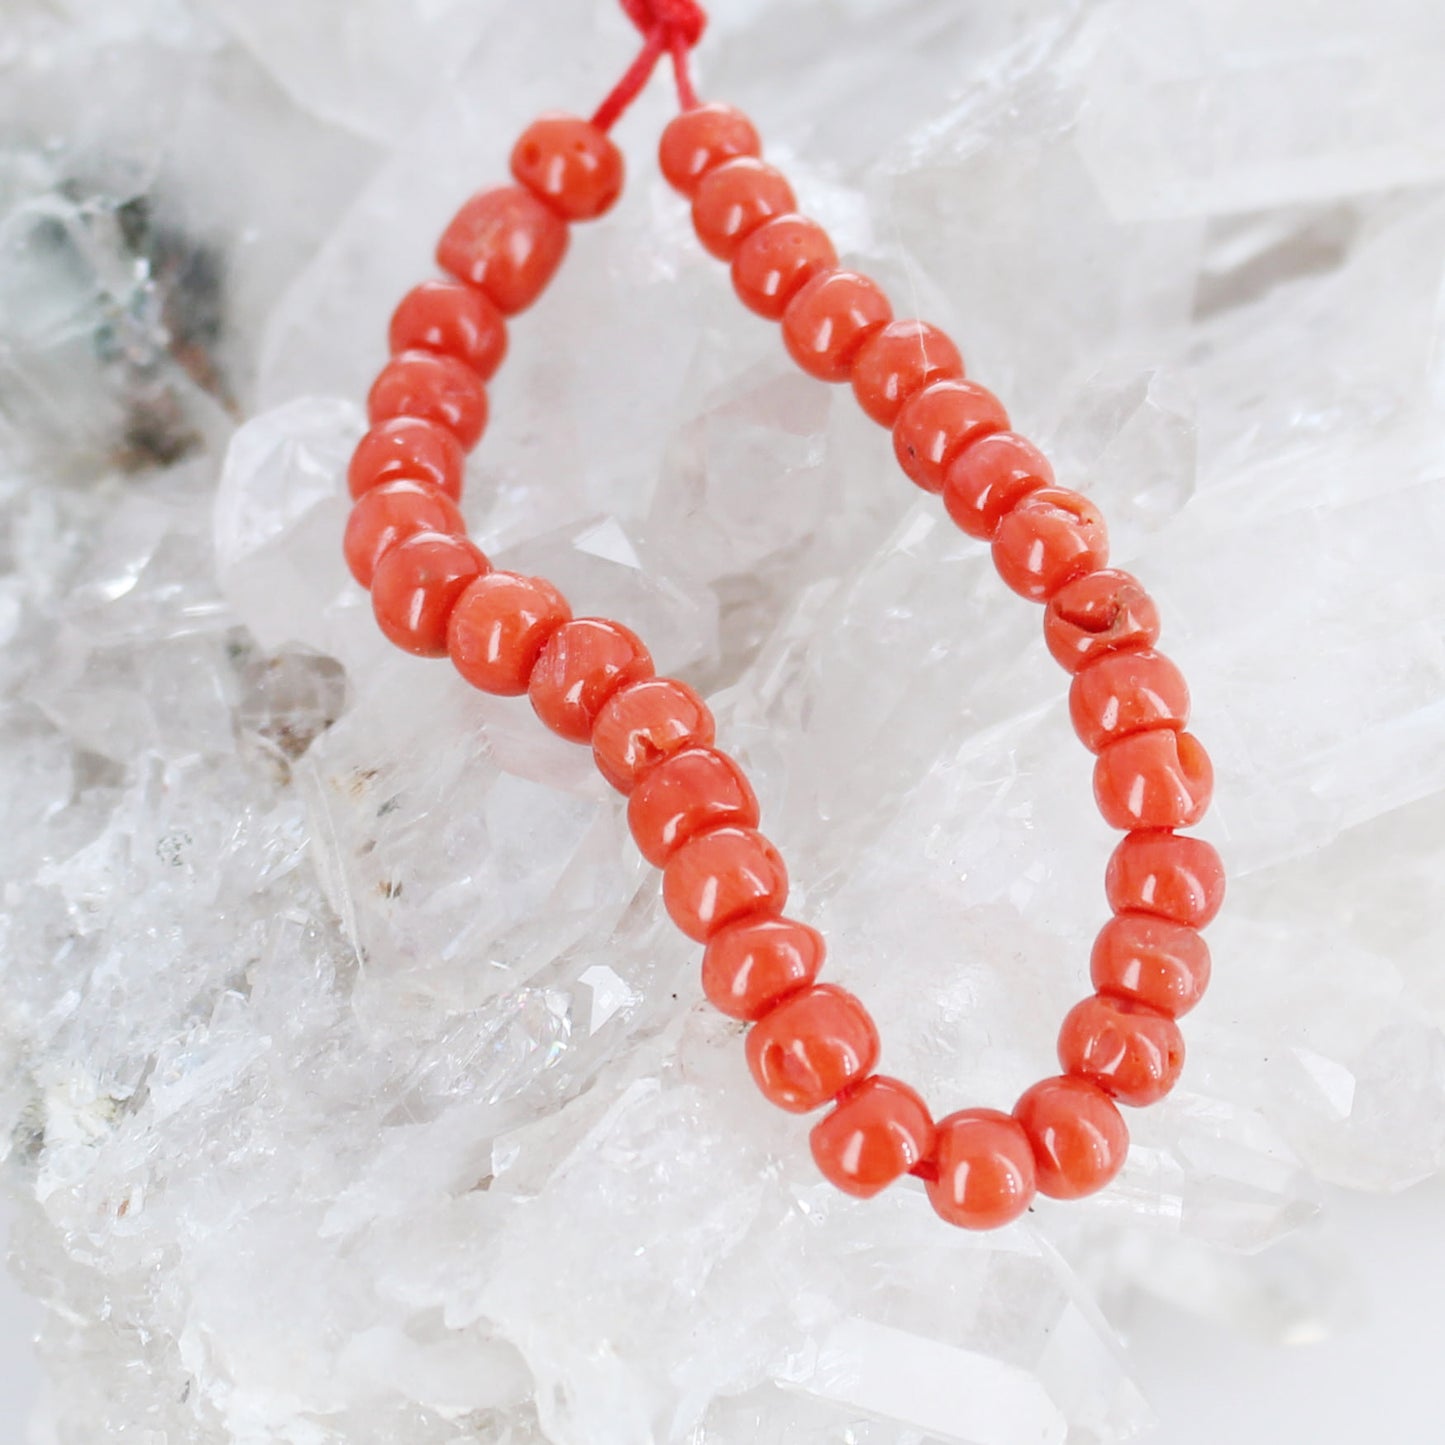 Bright Tomato Red Italian Coral Beads Pueblo Shaped 5.5mm 3.75"